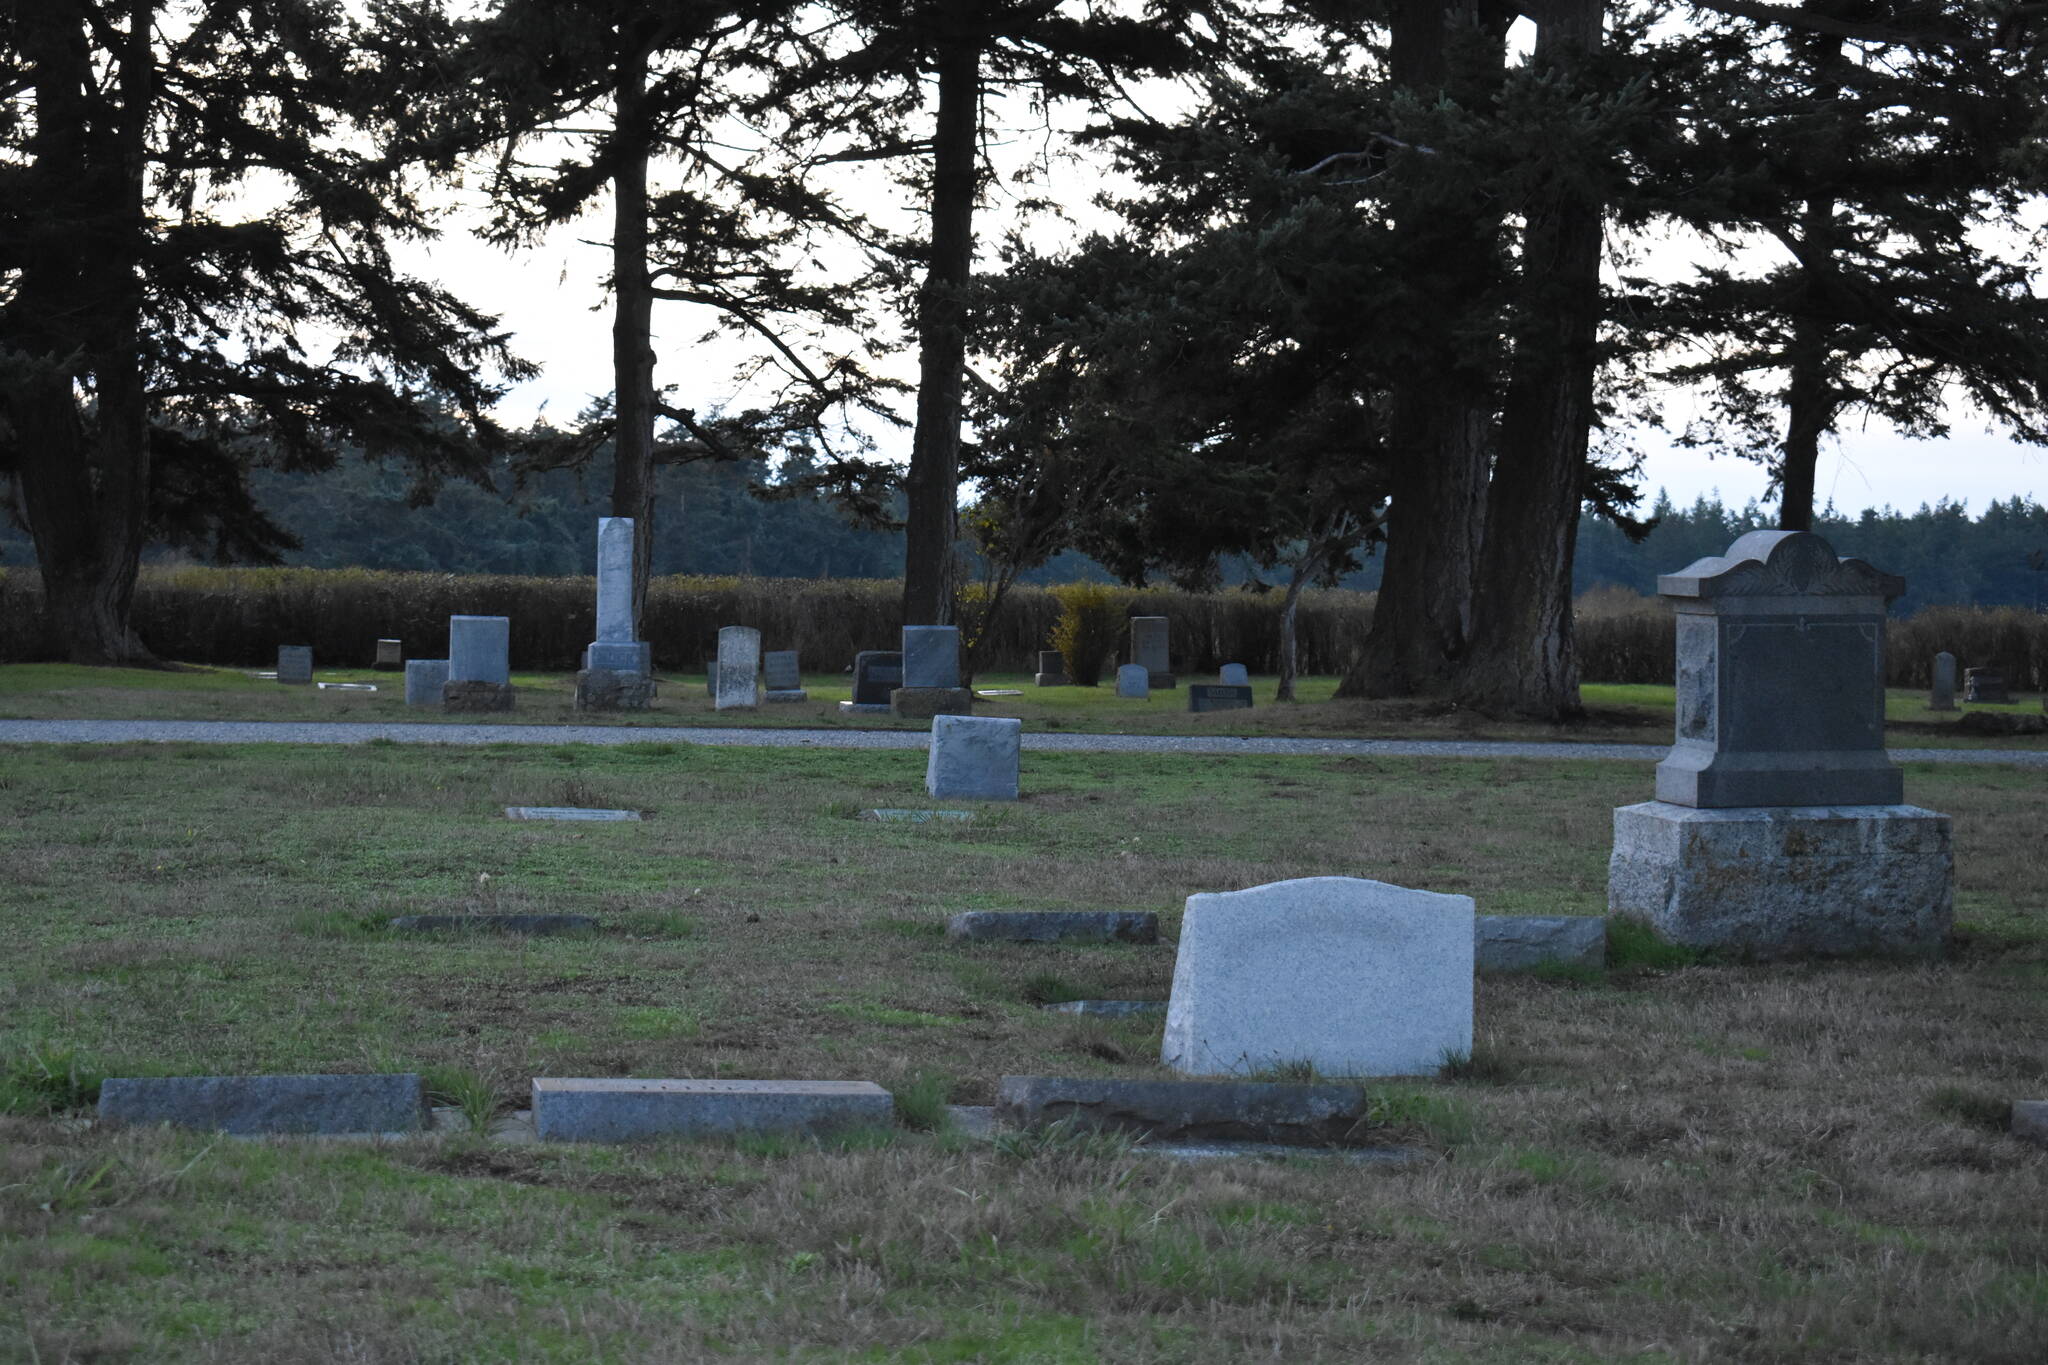 One of the first stops of Gabrielle Robles’ Haunted History Tour of Whidbey Island is at Sunnyside Cemetery in Coupeville.